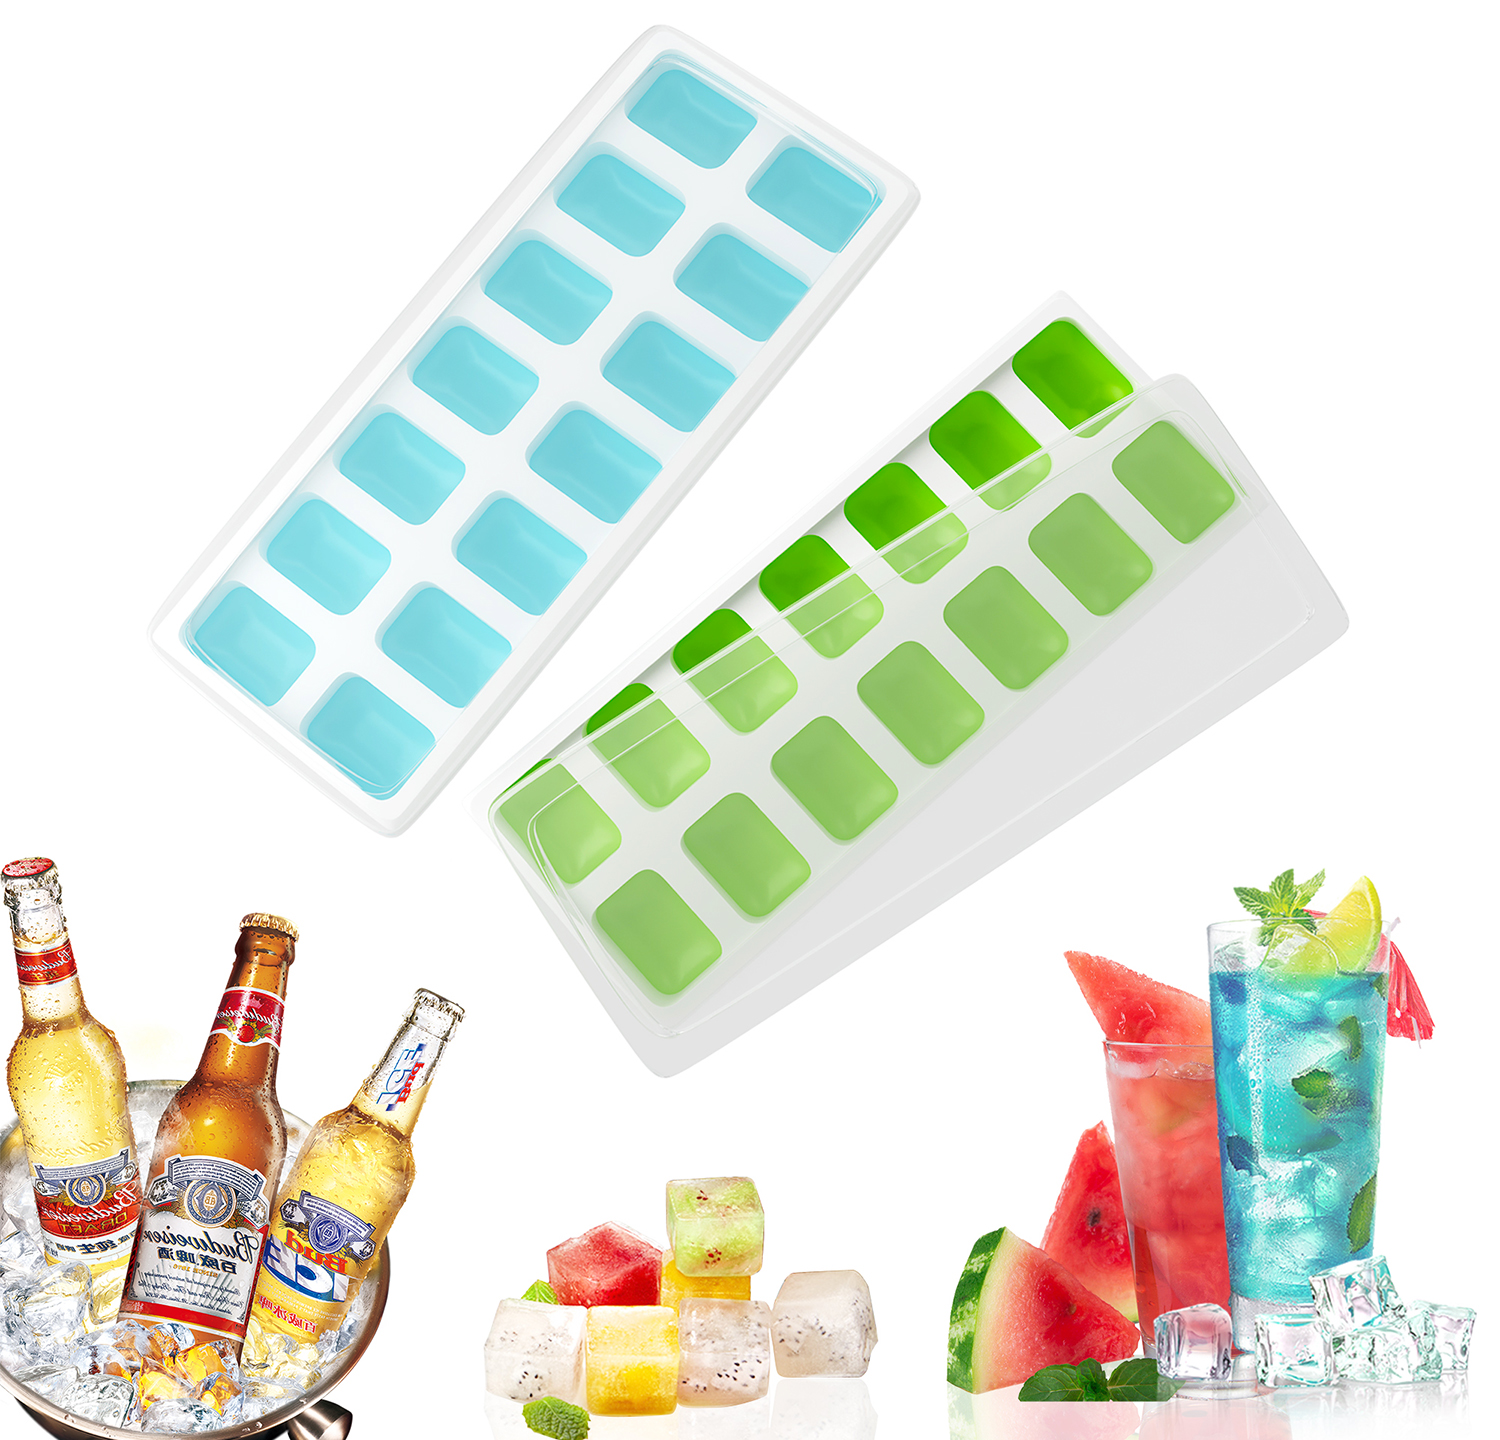 Ouddy 4 Pack Ice Cube Trays with Lid, Silicone Ice Cube Molds, 14-Ice Trays Can Make 56 Ice Cubes, BPA Free Nontoxic and Safe, Stackable Durable ( Blue & Green )